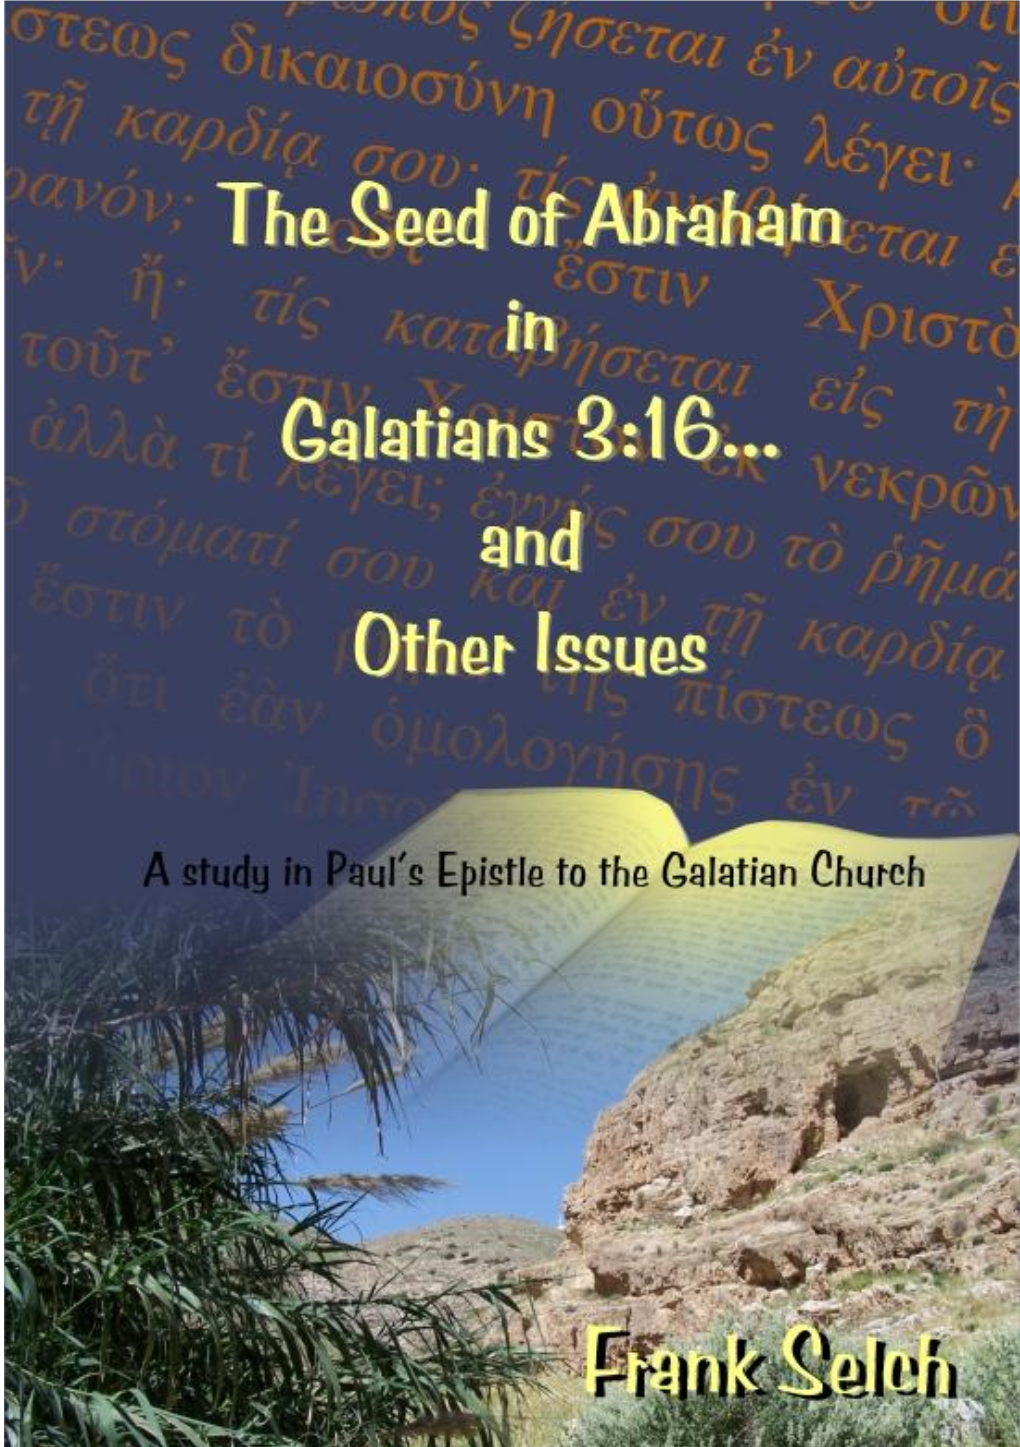 The Seed of Abraham in Galatians 3:16 and Other Issues Subtitle: a Study in Paul‘S Epistle to the Galatian Church Format: Paperback Publication Date: 08/11